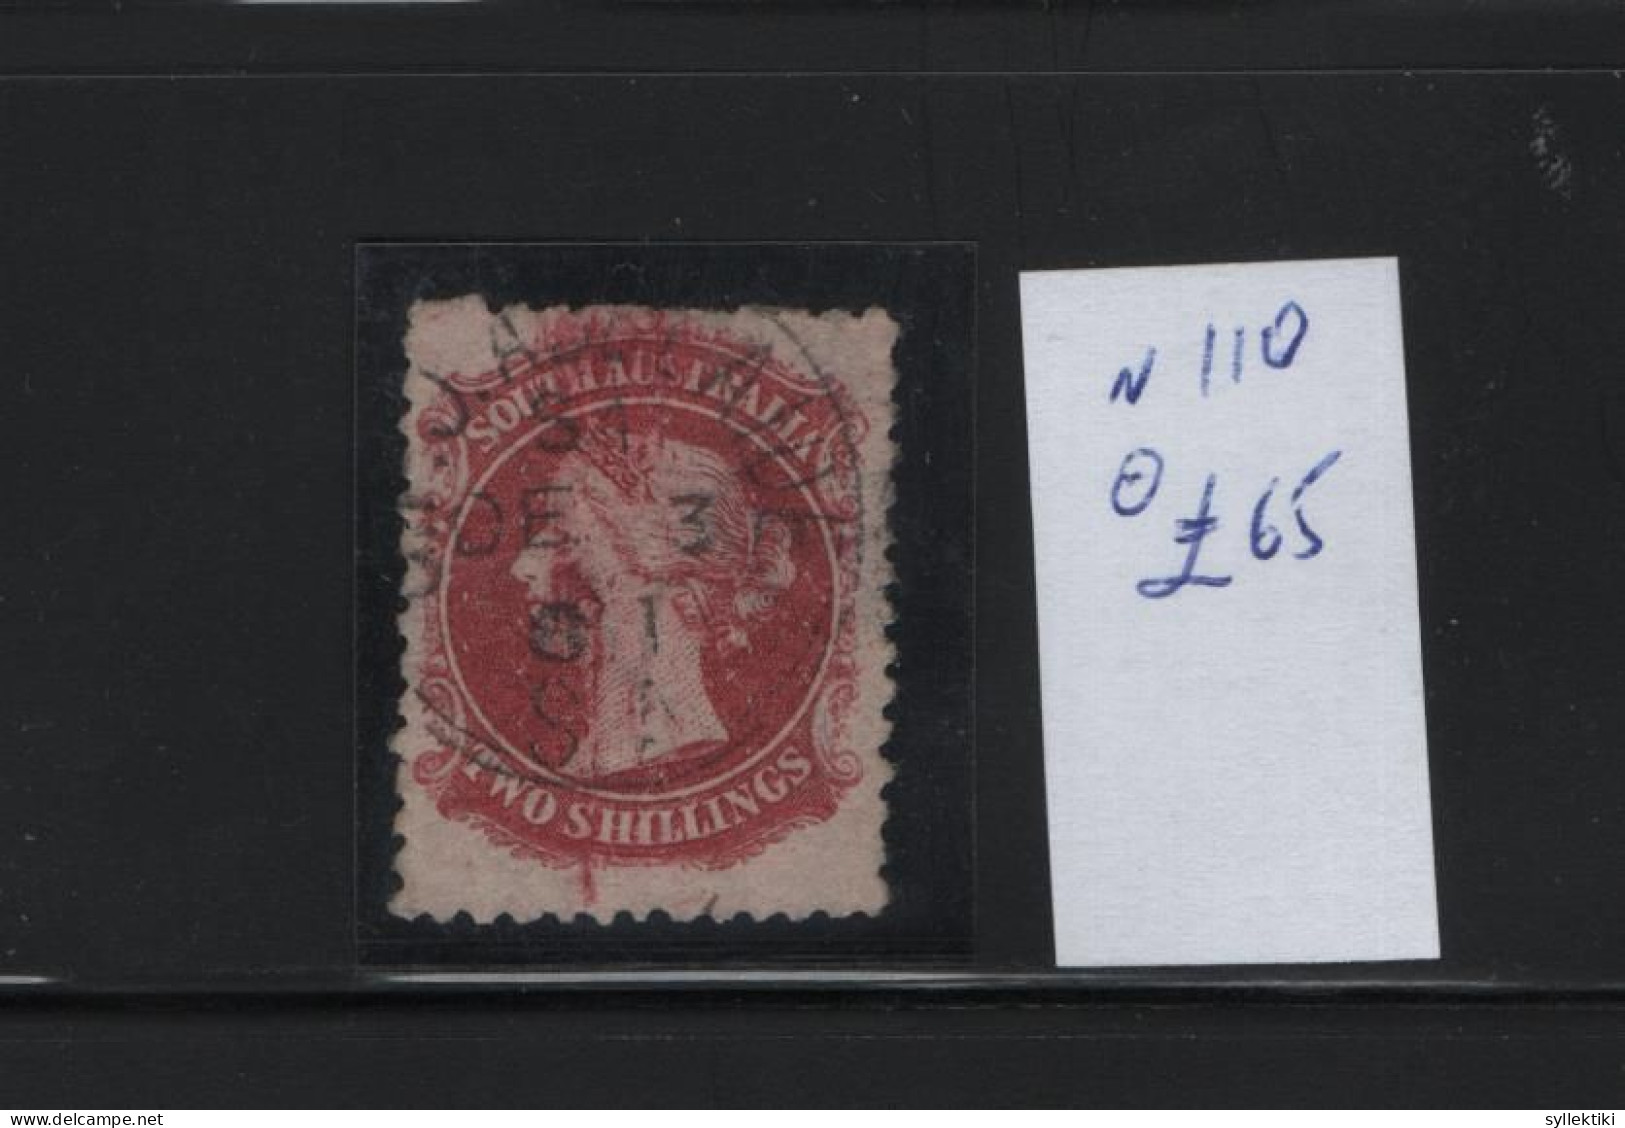 SOUTH AUSTRALIA  1870/73 2 SHILLINGS USED STAMP   STANLEY GIBBONS No 110 AND VALUE GBP 65.00 - Used Stamps